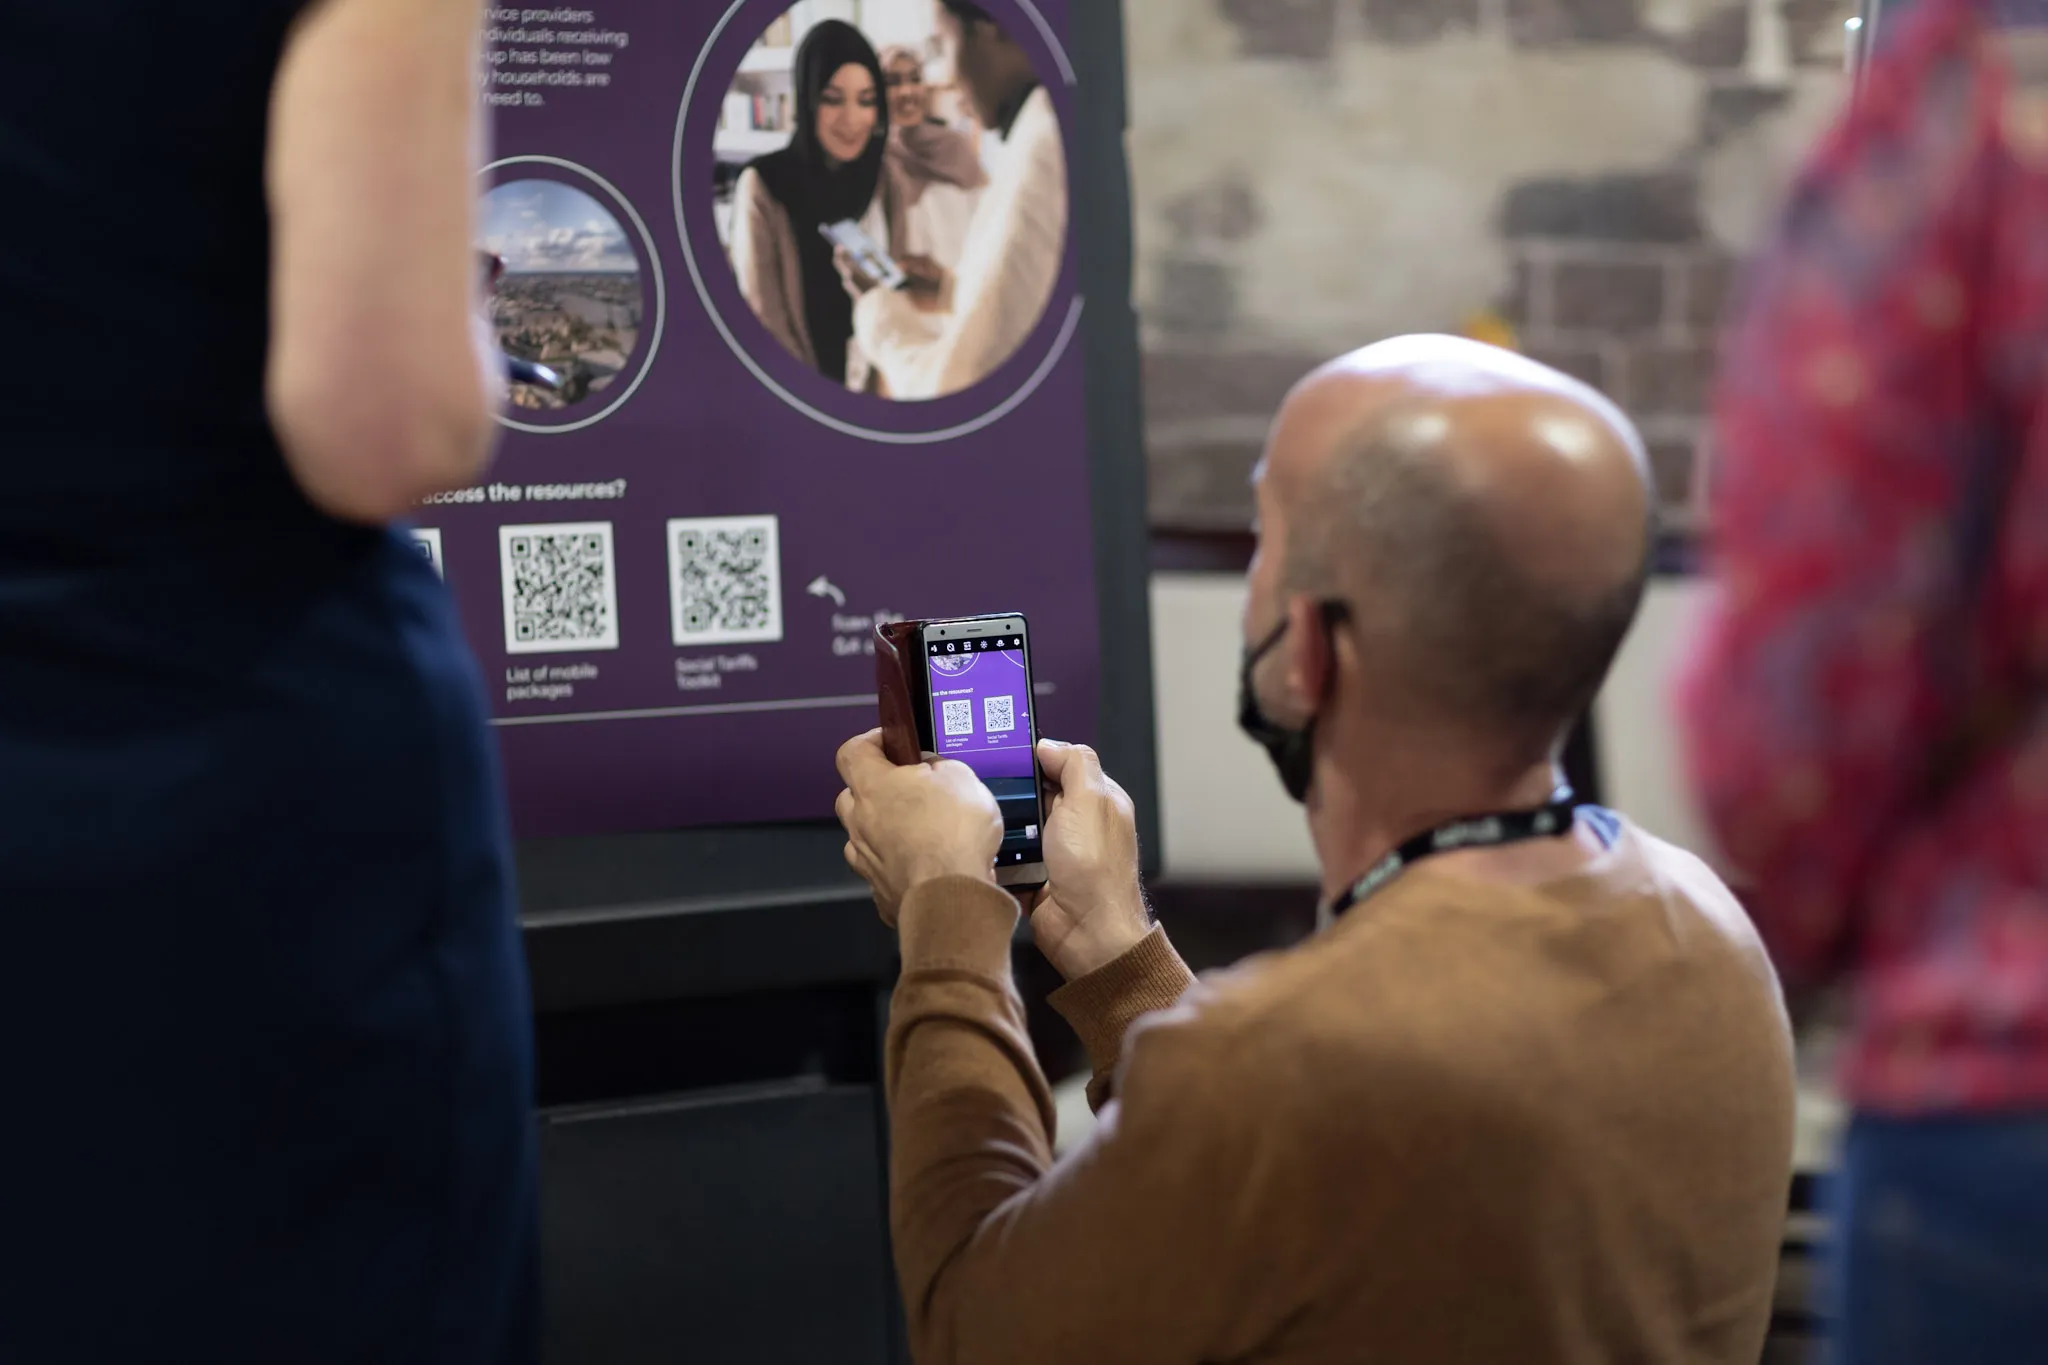 A photo of a man scanning a QR code on one of the exhibition posters.